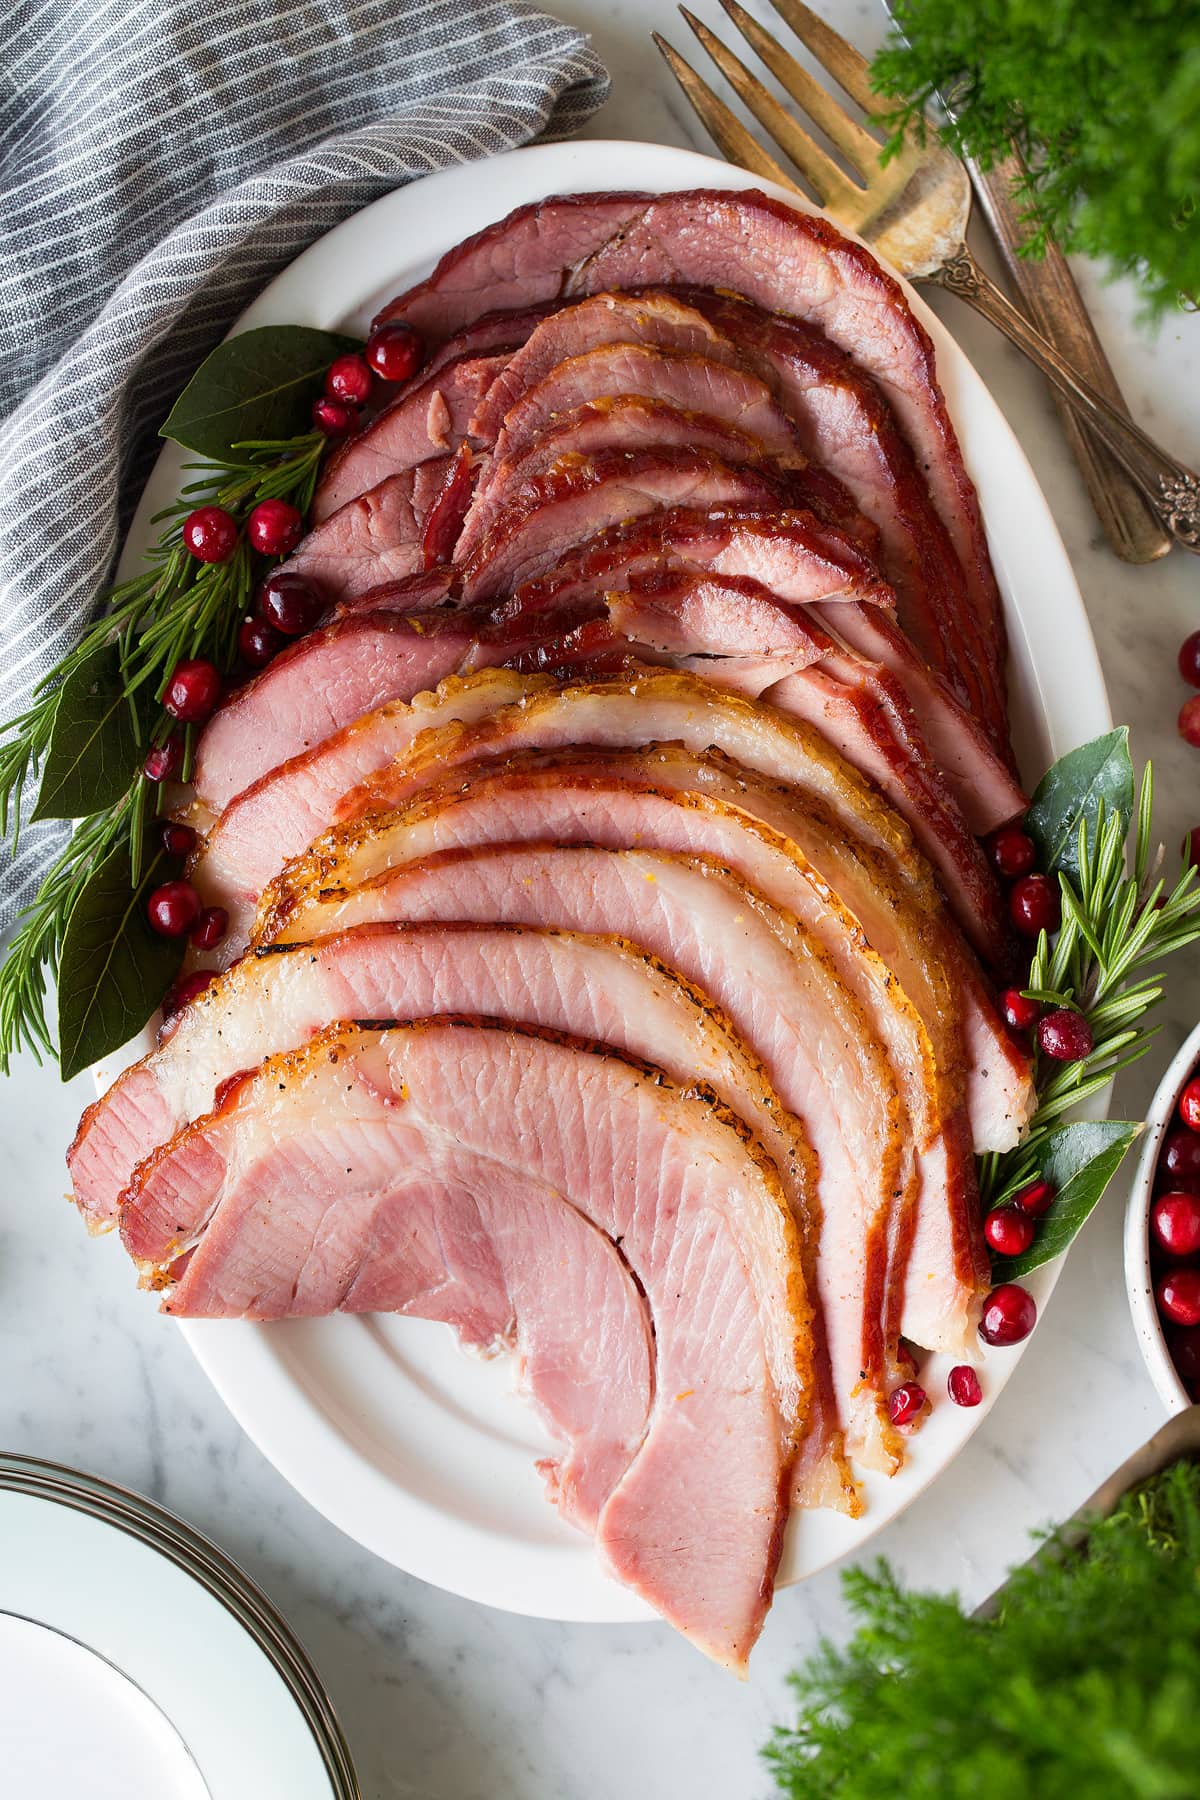 Honey baked ham slices on white serving platter garnished with fresh herbs and cranberries